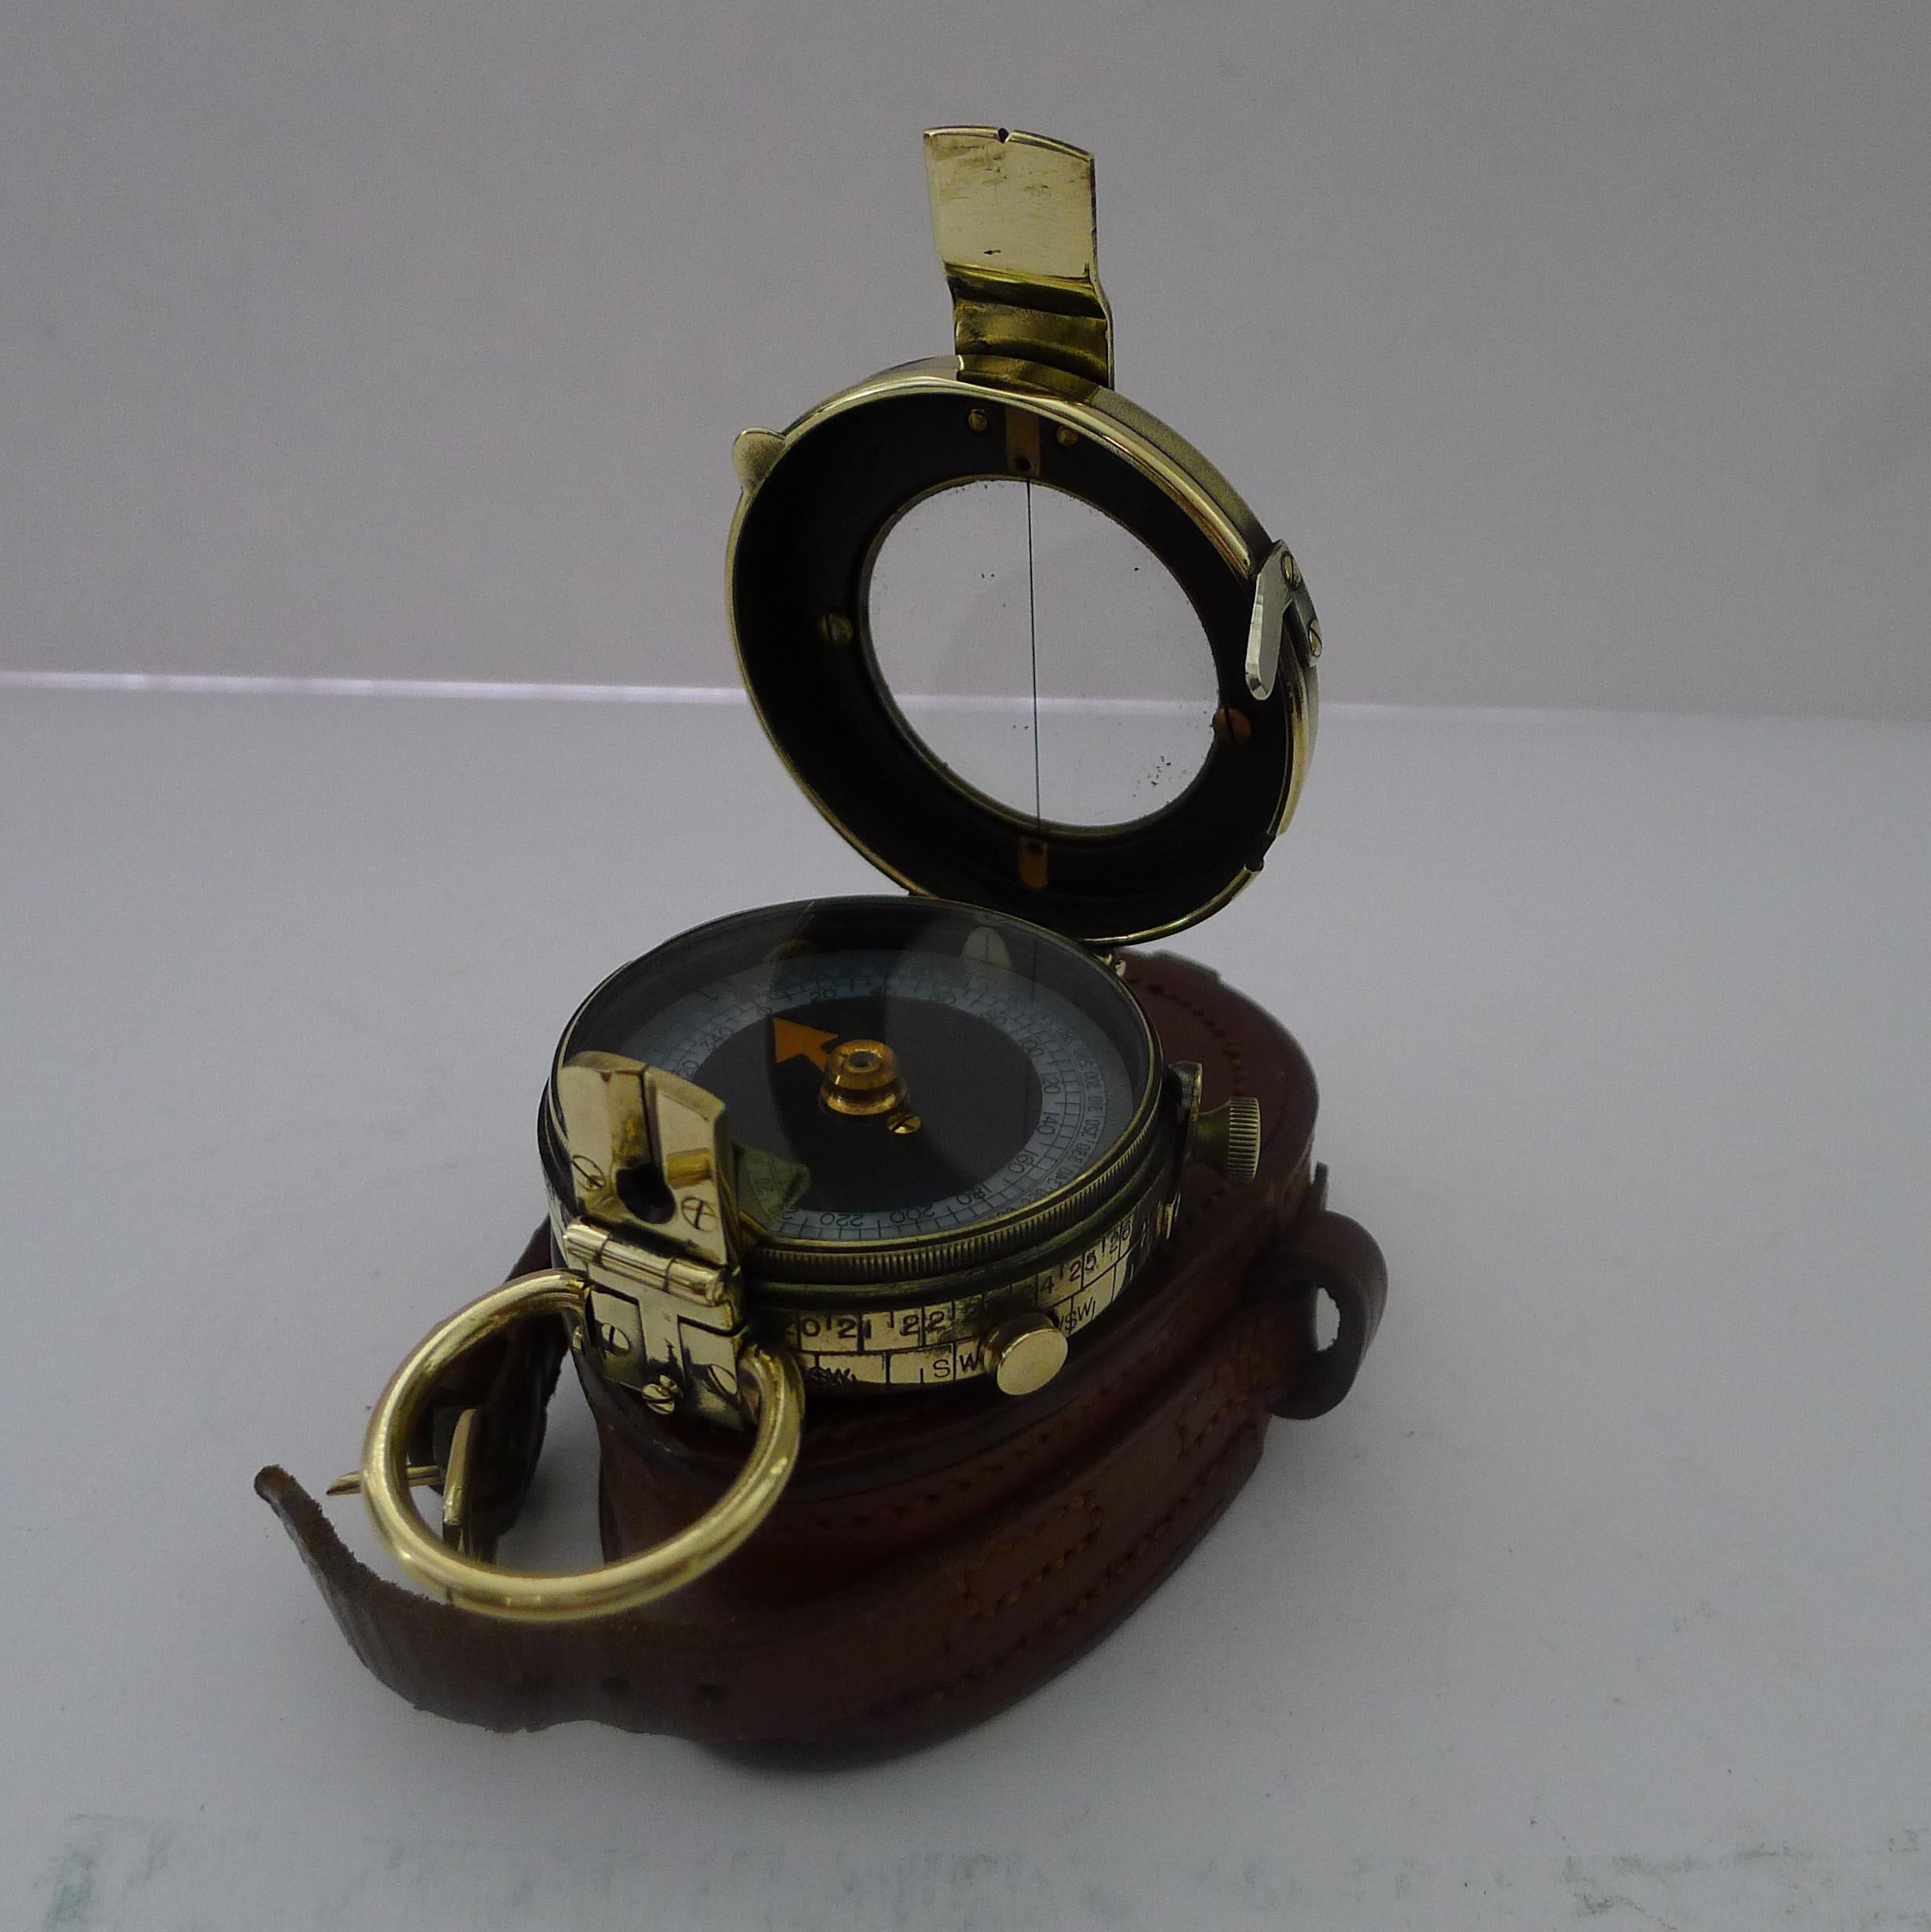 Early 20th Century WW1 1917 British Army Officer's Compass, Verner's Patent MK VIII by French Ltd